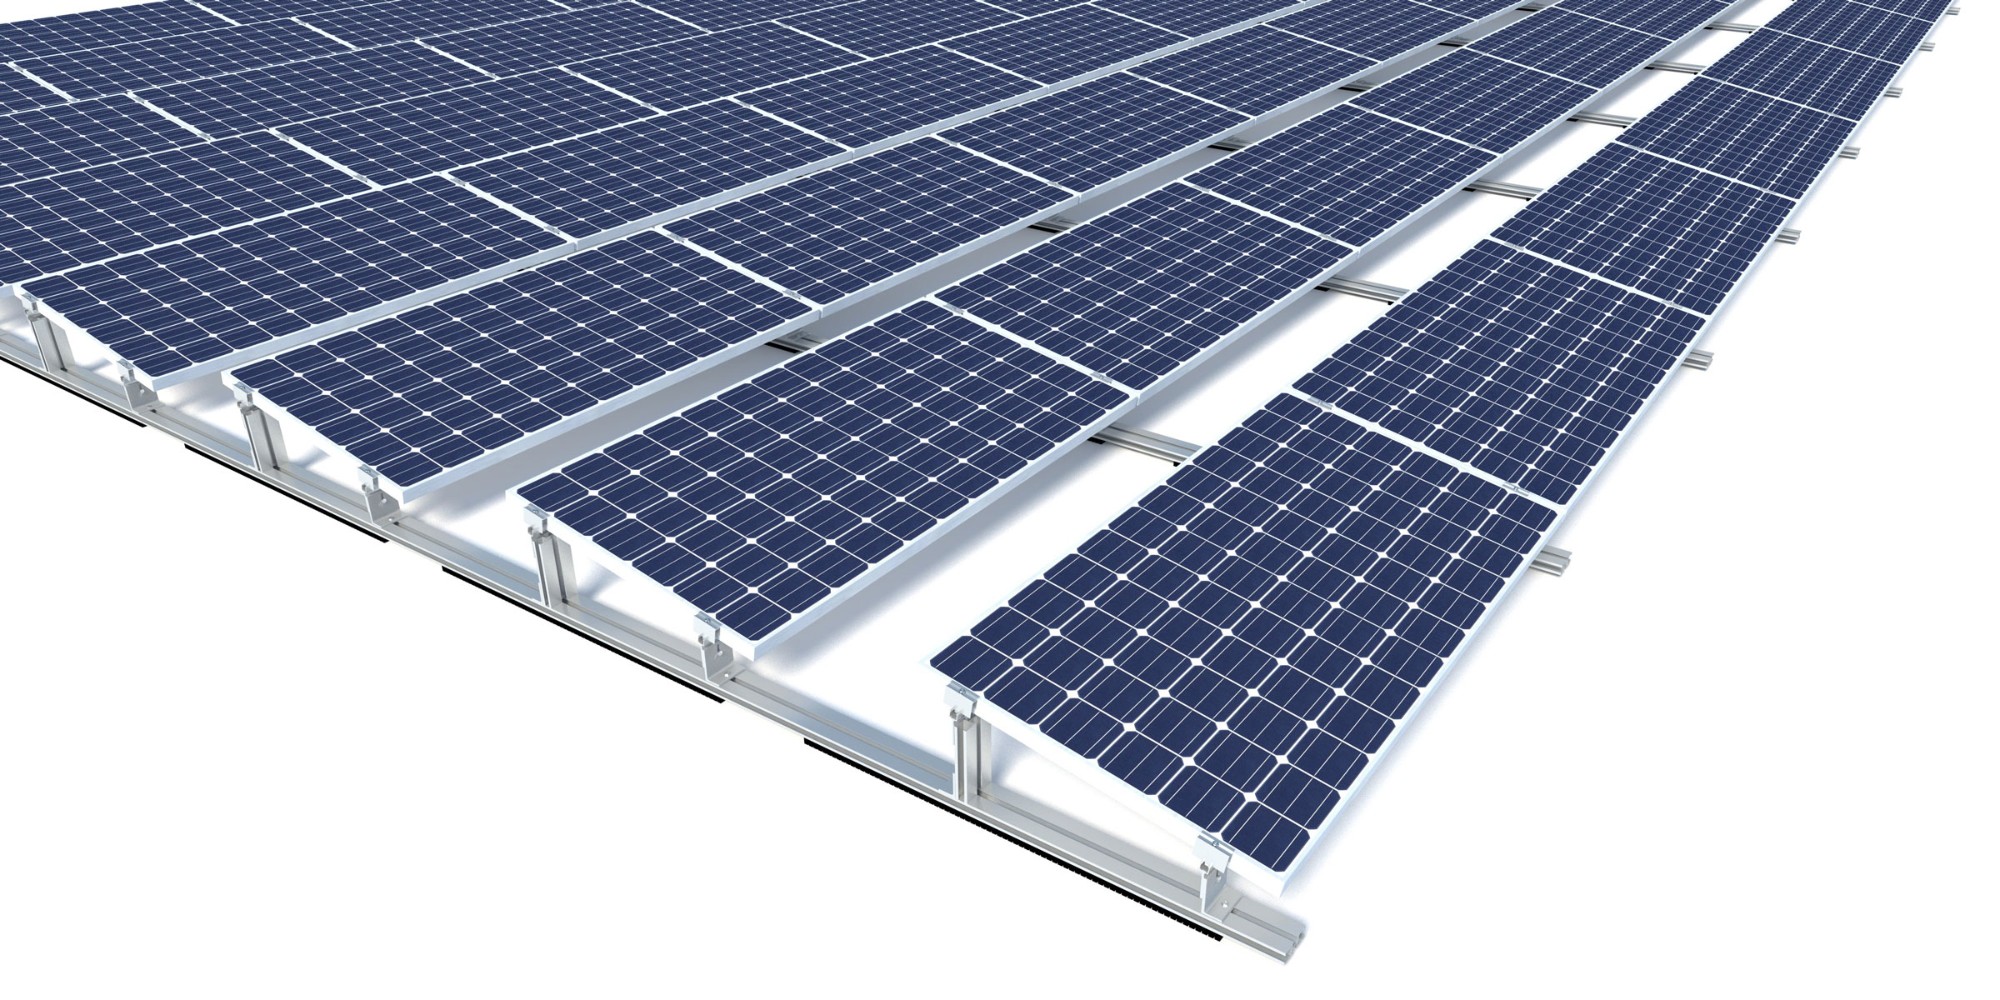 PV Rail-free Ballasted Roof Mount Manufacturers, PV Rail-free Ballasted Roof Mount Factory, Supply PV Rail-free Ballasted Roof Mount